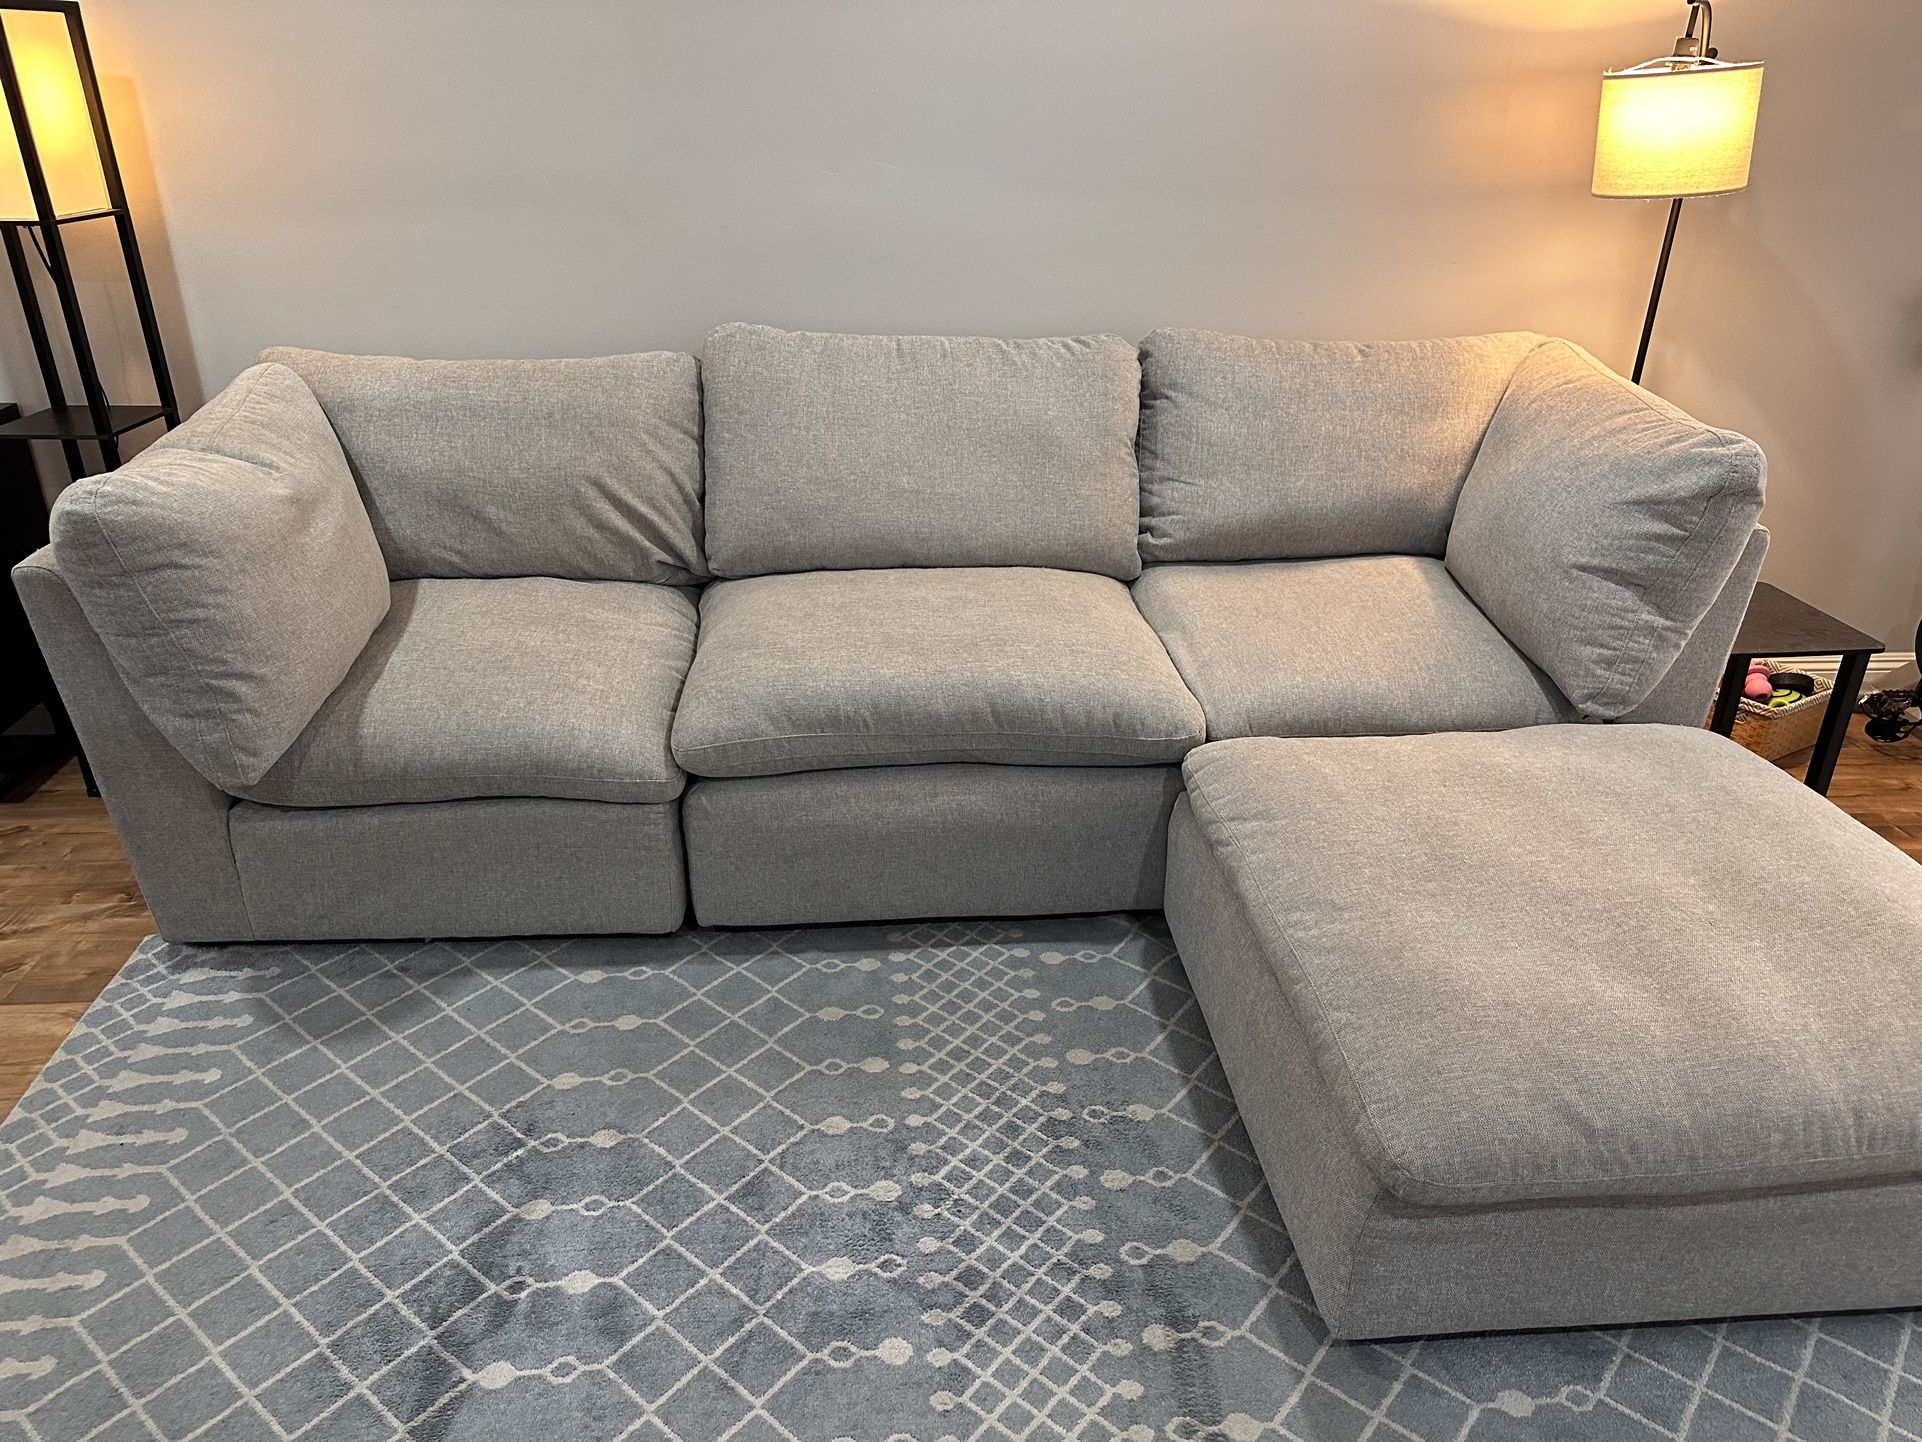 Modular Sectional Couch With Ottoman